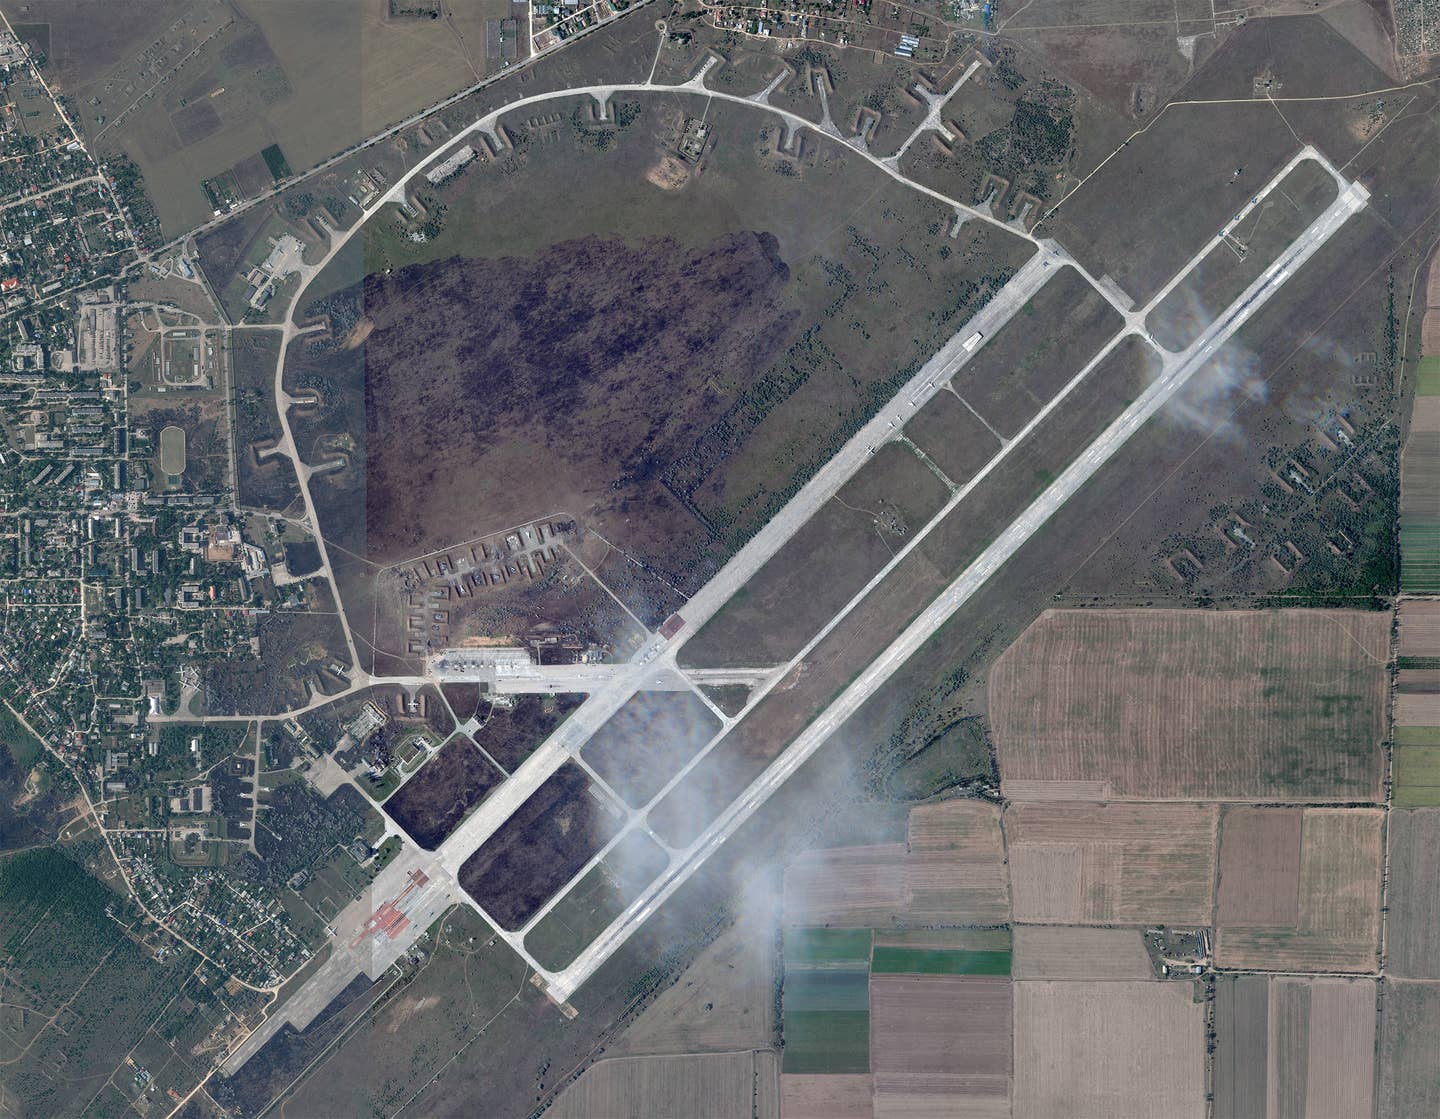 A satellite image of Saki Air Base taken on August 10, 2022, the day after a series of explosions ripped through the base. <em>PHOTO © 2022 PLANET LABS INC. ALL RIGHTS RESERVED. REPRINTED BY PERMISSION</em>